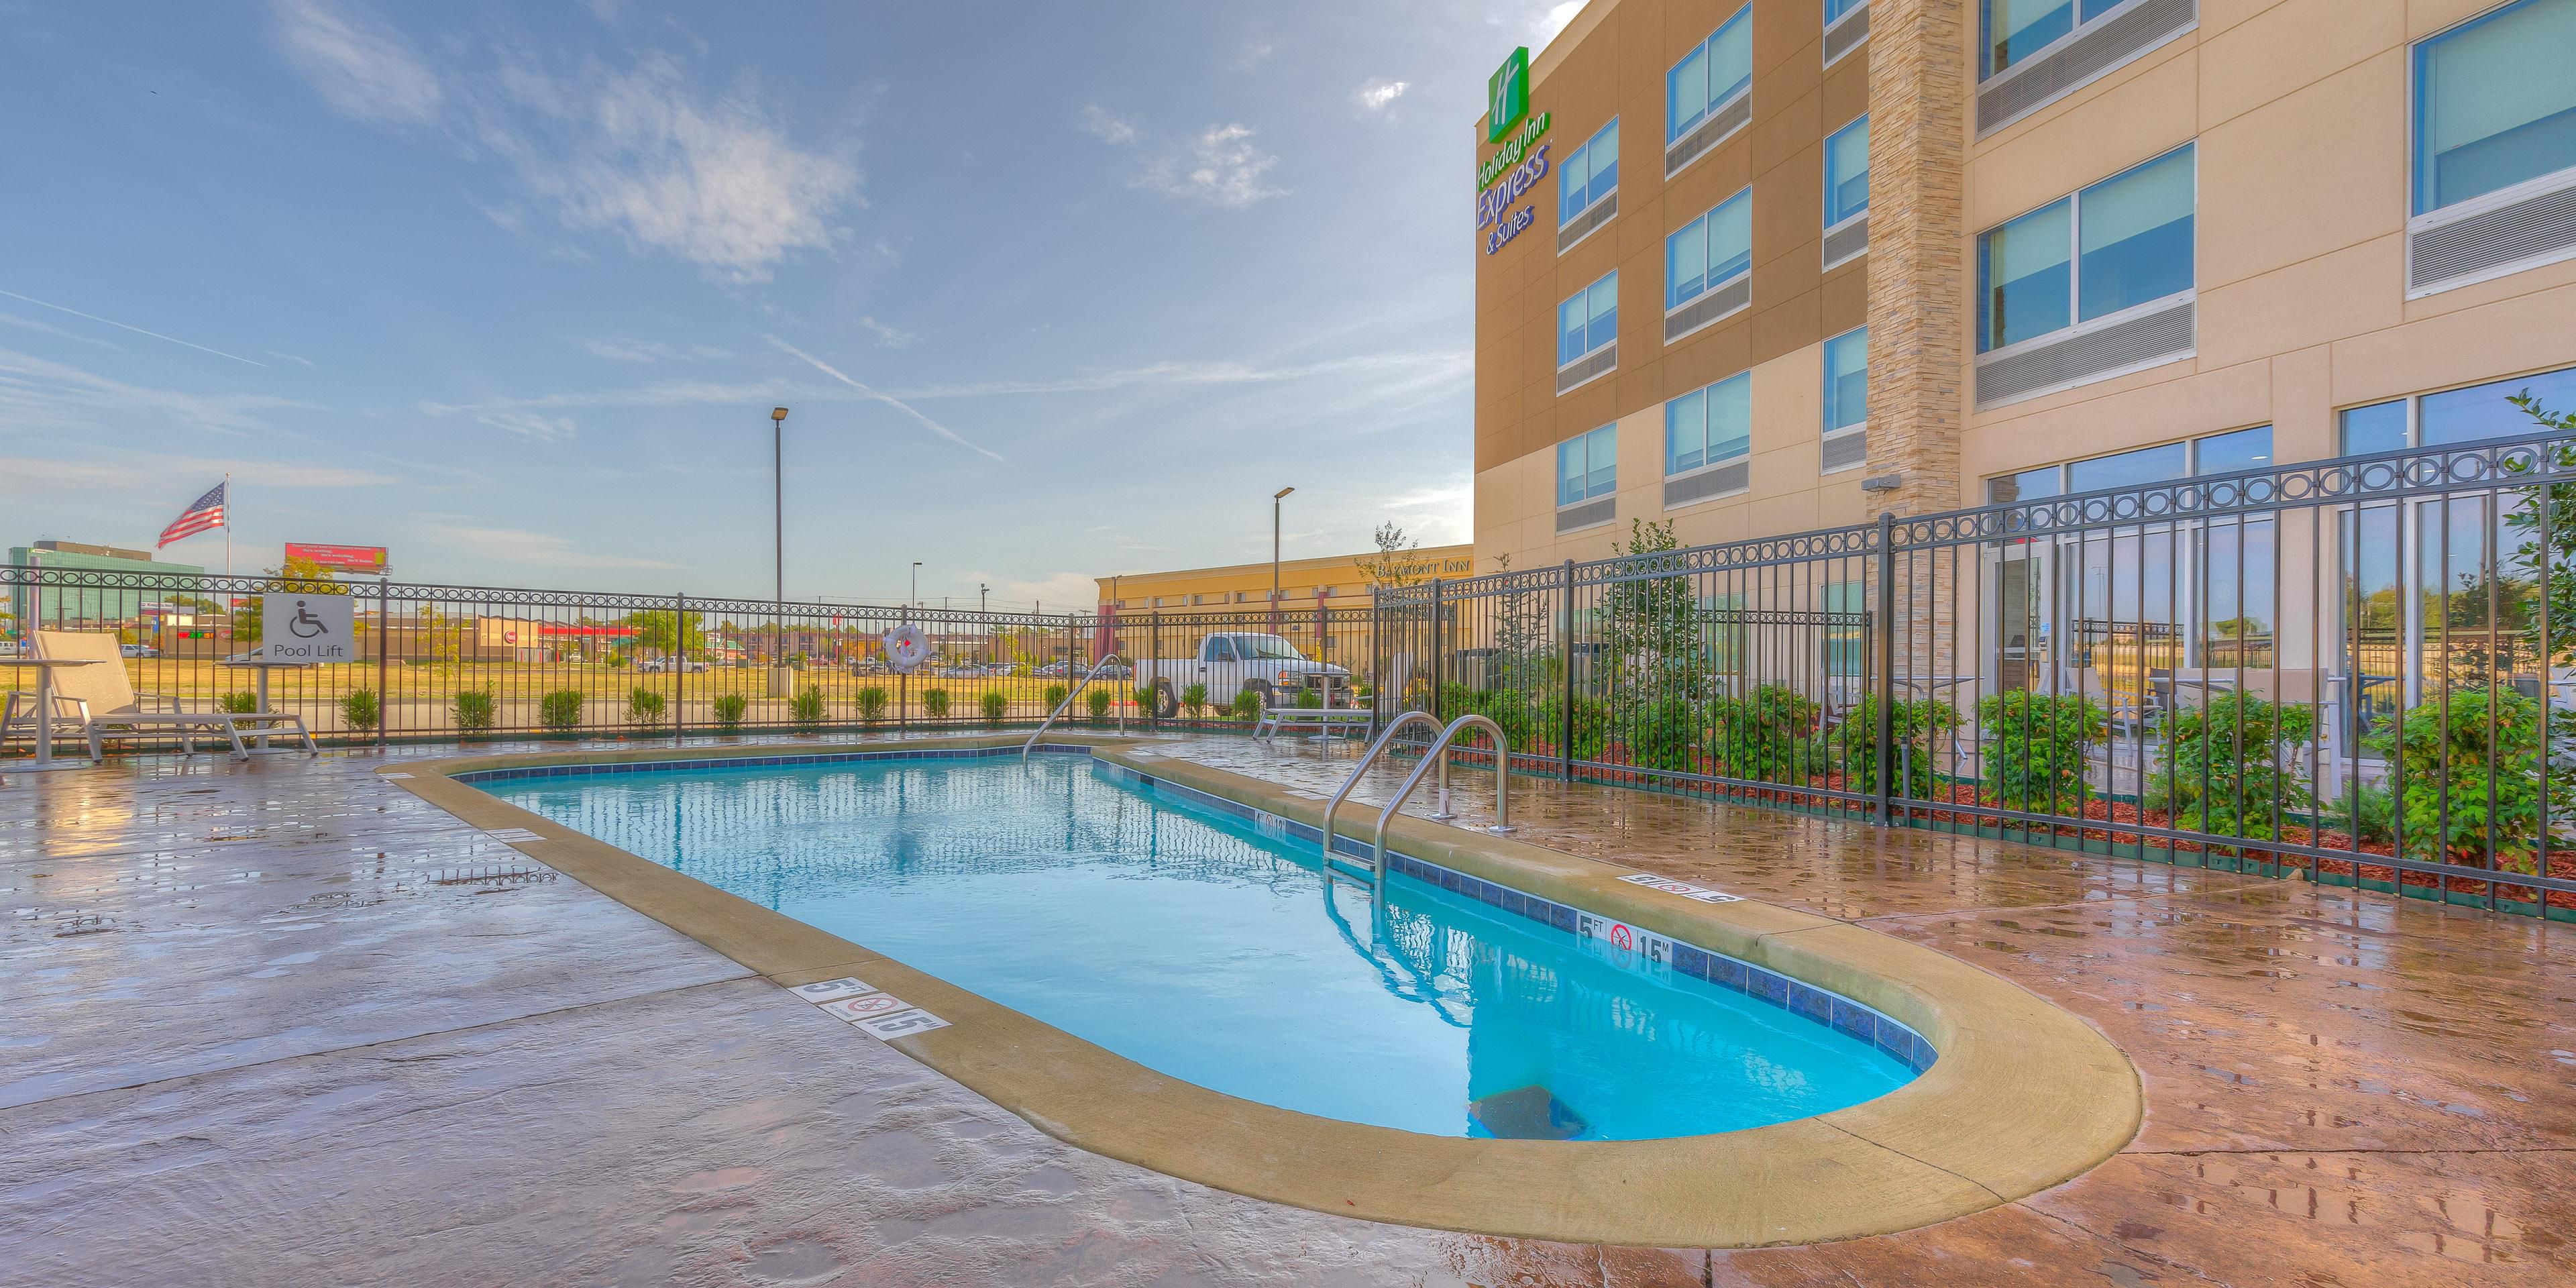 Kick back and take a seat on our patio or take a dip in our outdoor pool, which the patio overlooks. Guest can catch both sunrise and sunset from this sunny spot, and it's open year round, weather permitting.